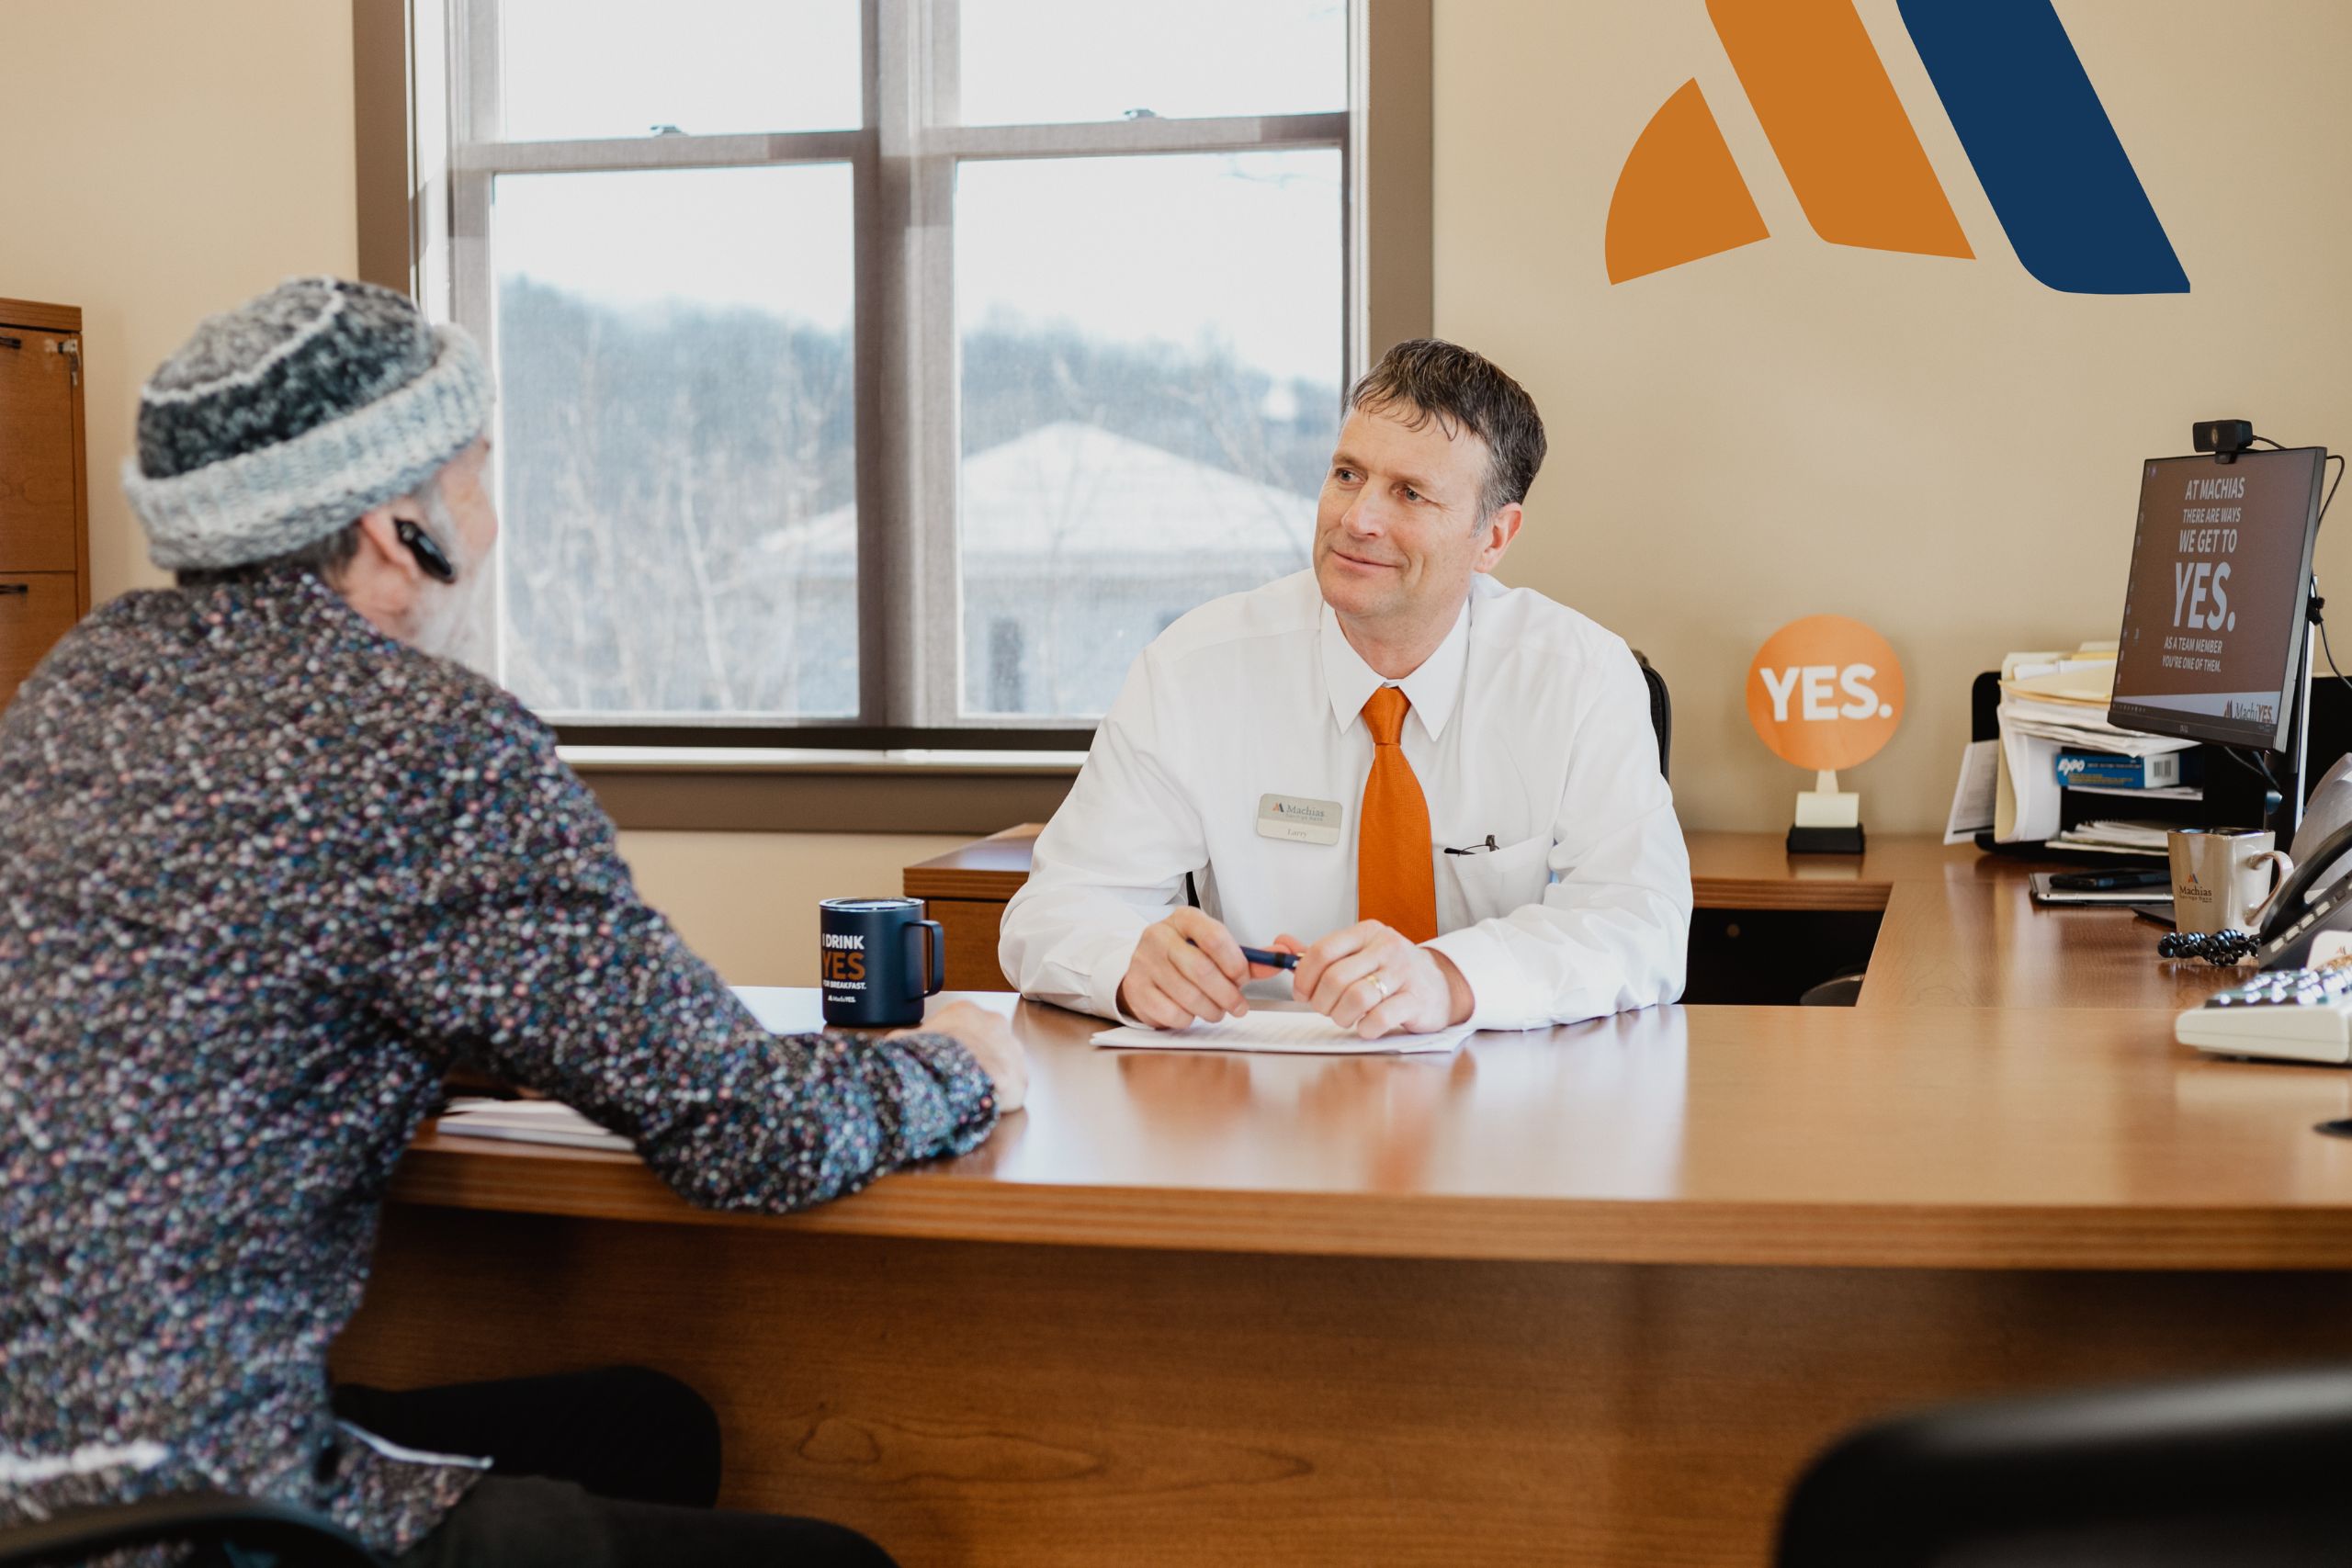 A Machias Savings Bank worker meets with a client. They are sitting in a office at a desk.